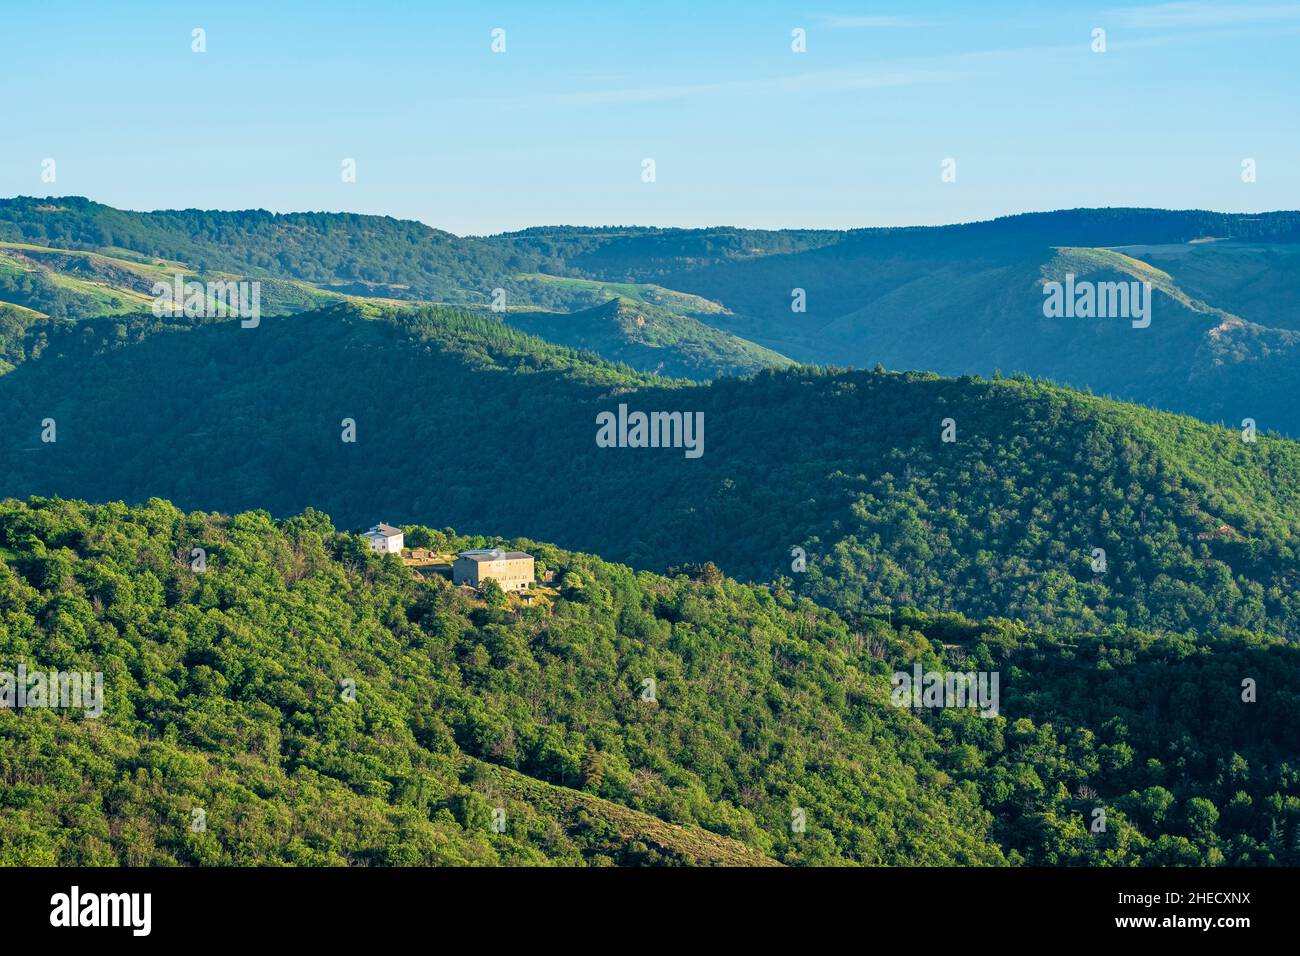 France, Lozere, Corniche des Cevennes, former Royal road from Nimes to Saint-Flour, Le Pompidou, panorama over Vallee Fran?aise Stock Photo